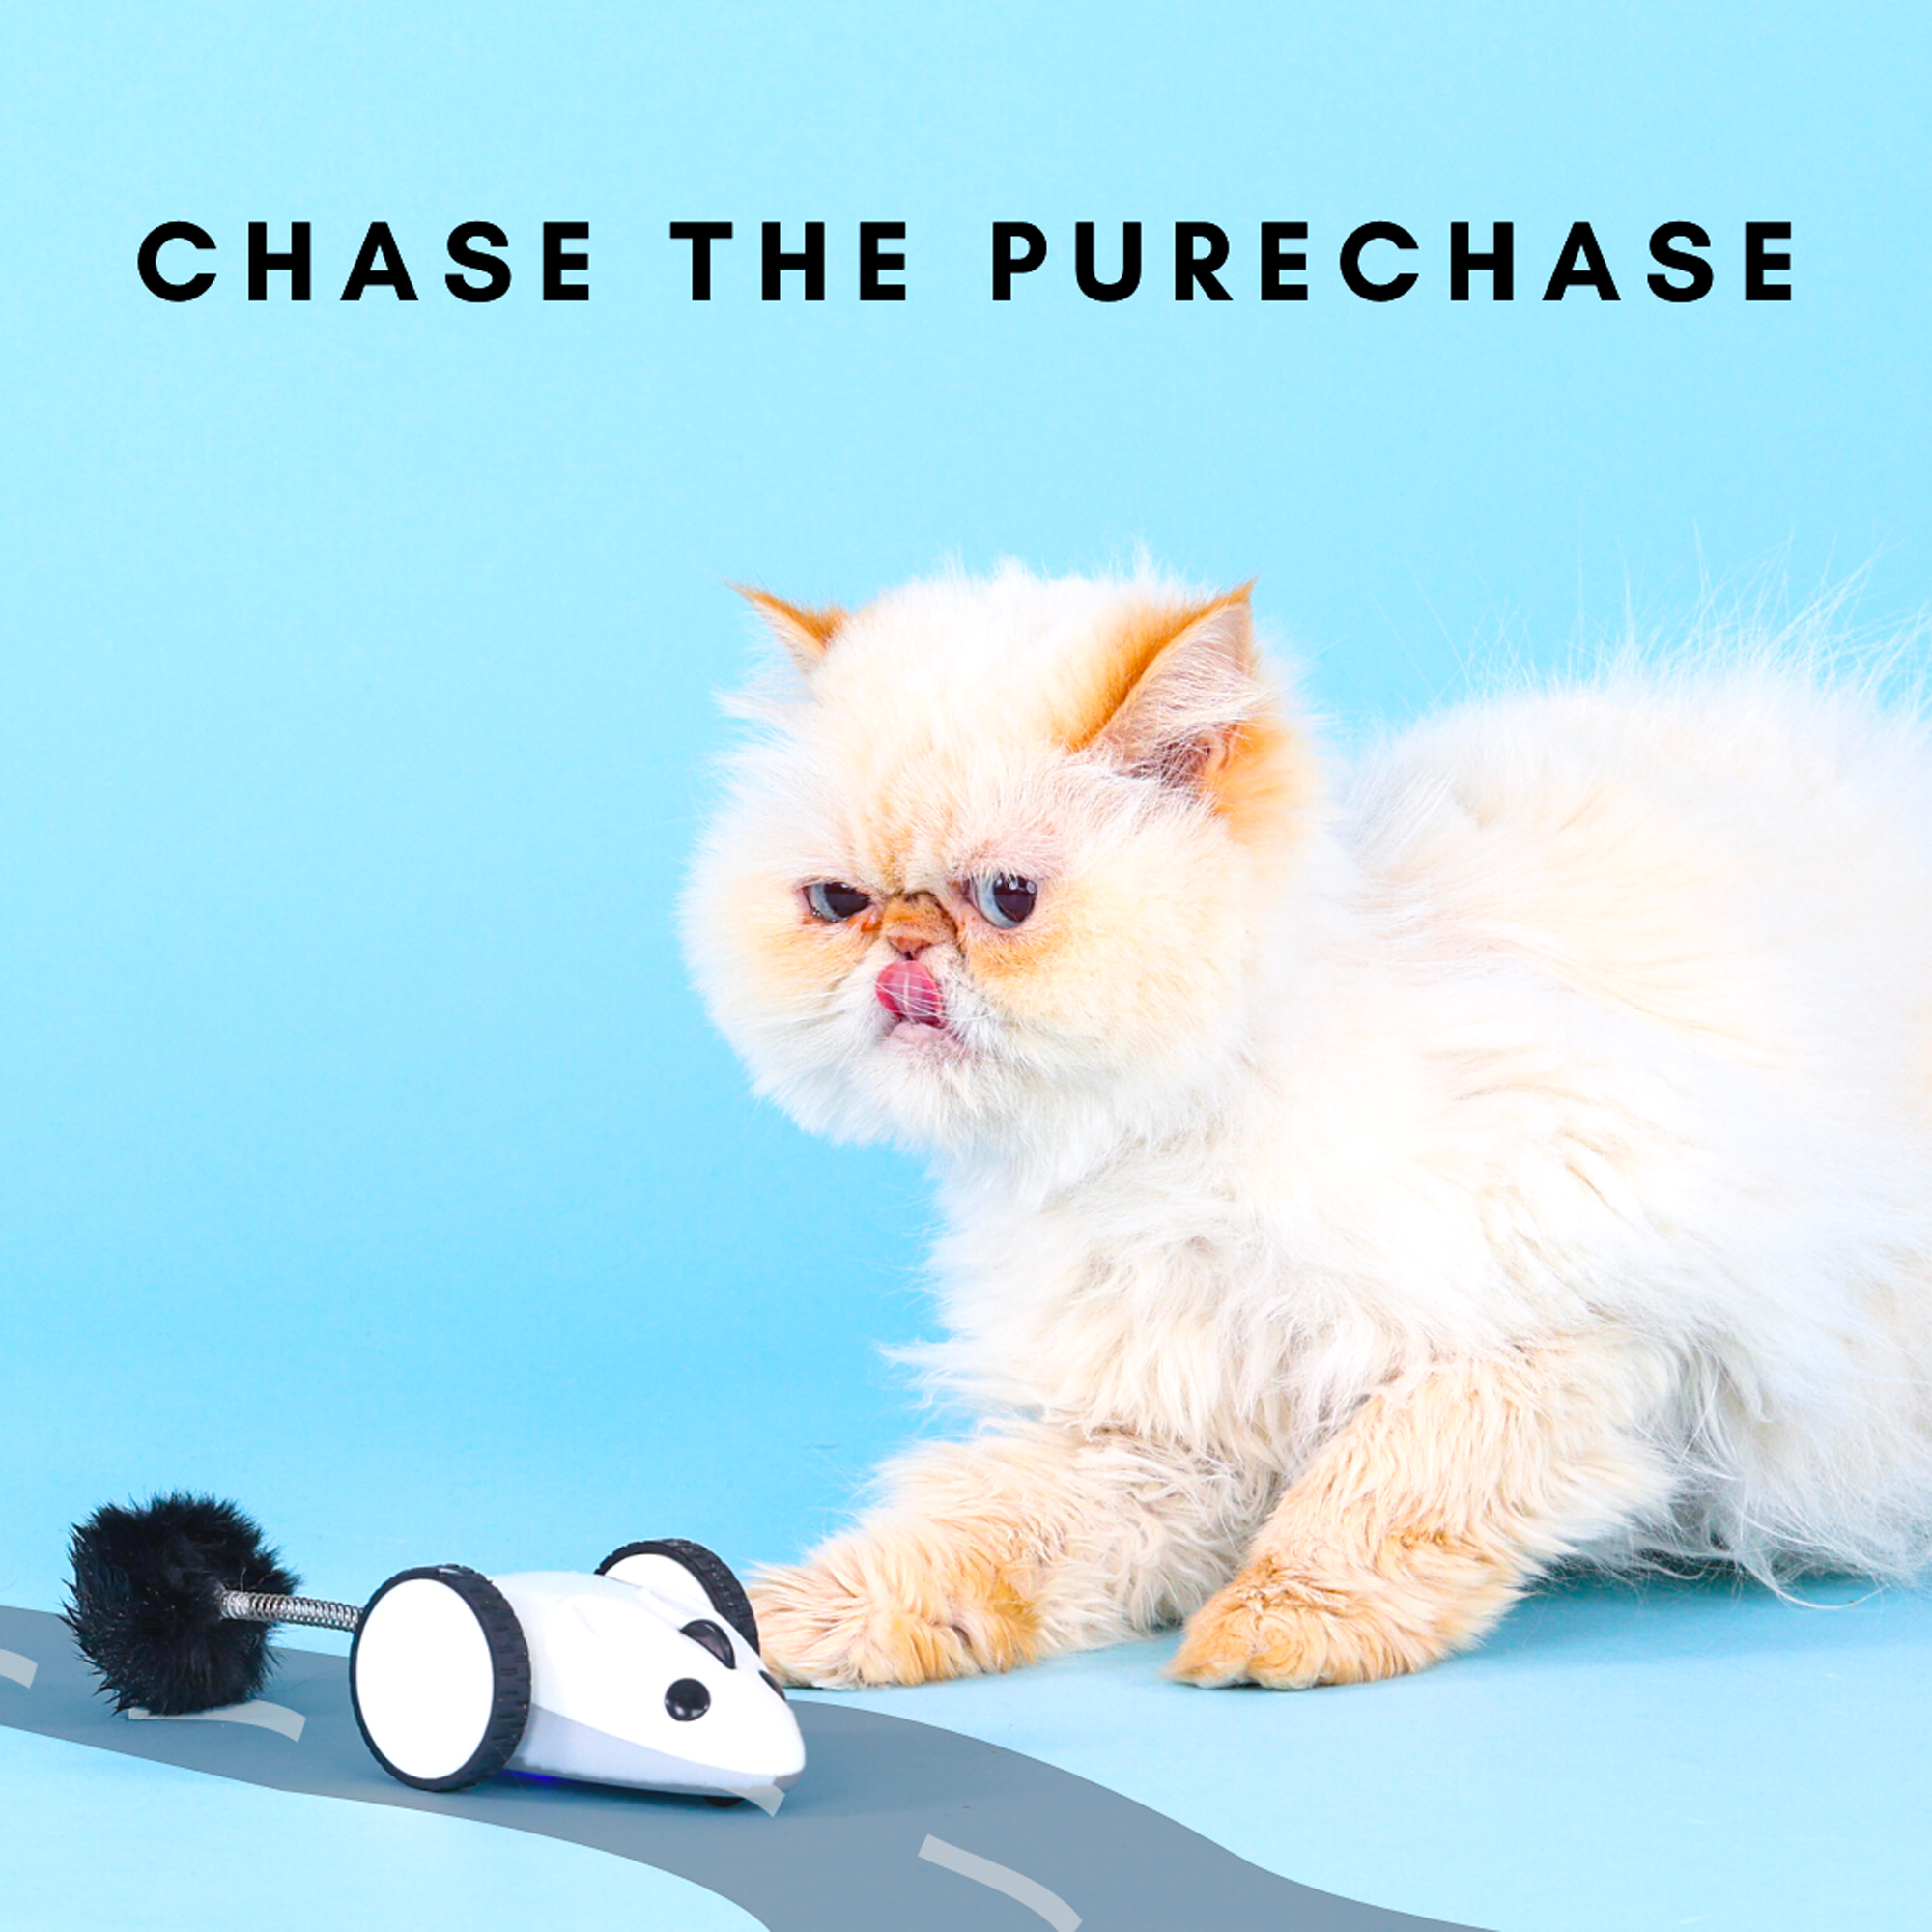 Instachew Purechase Smart Cat Toy, Interactive Automatic Mouse shaped Toy for Pets, App Enabled with Adjustable Speed, Flip Modes, Replaceable Plush Tail and USB Charging for Kittens and Dogs - image 5 of 8